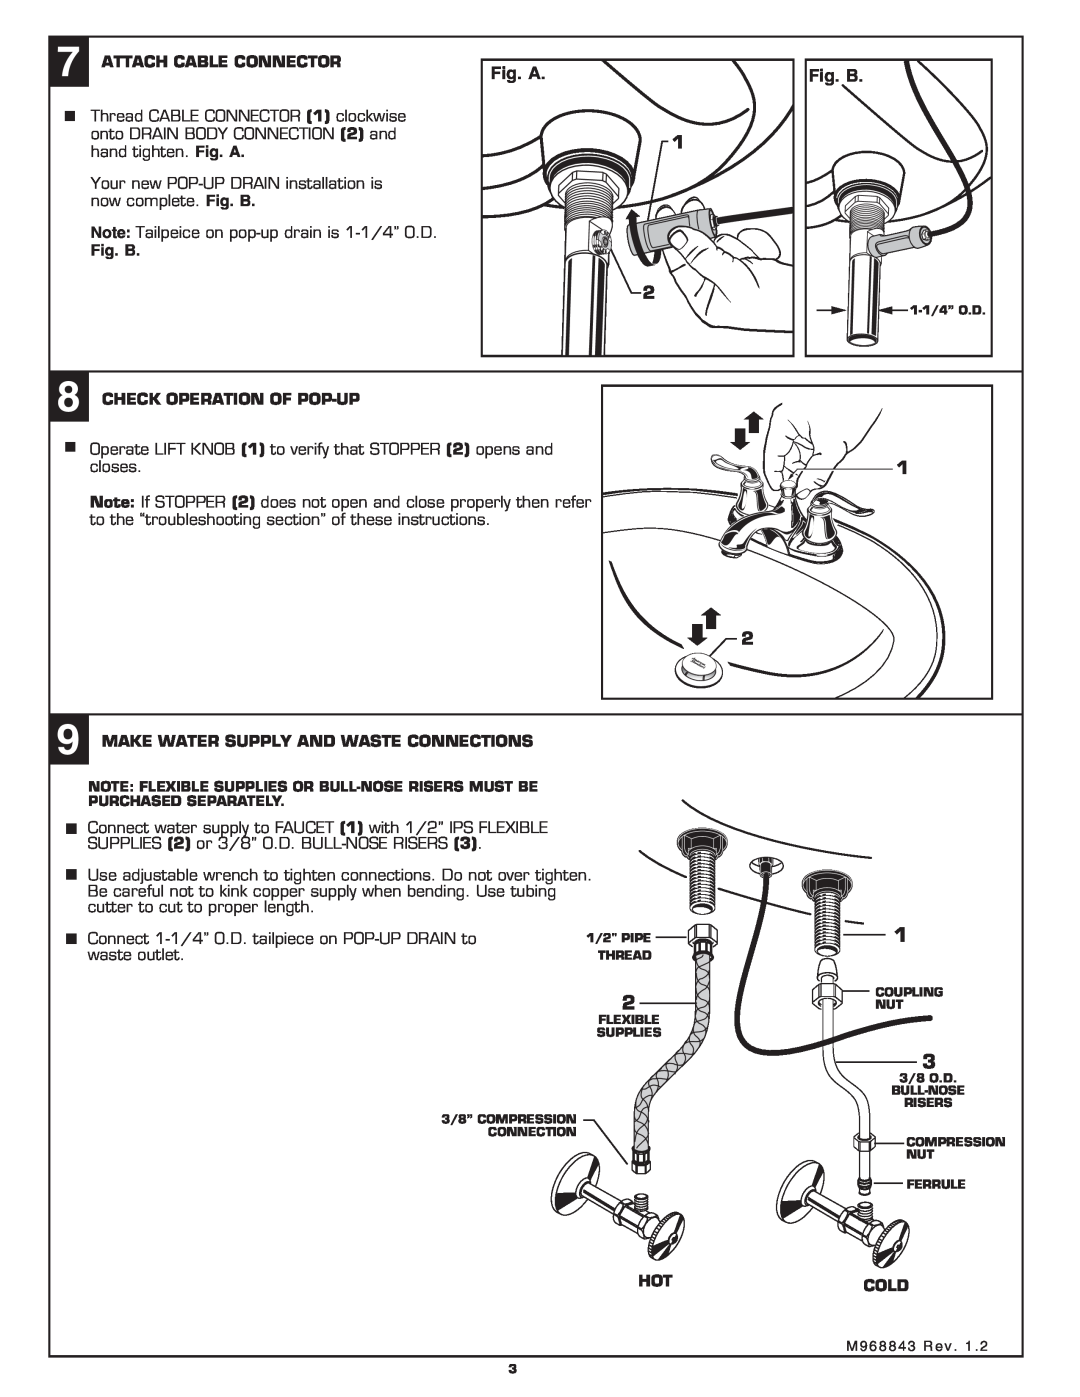 American Standard 4508.201 Fig. A, Fig. B, Attach Cable Connector, Check Operation Of Pop-Up, closes, Hotcold 